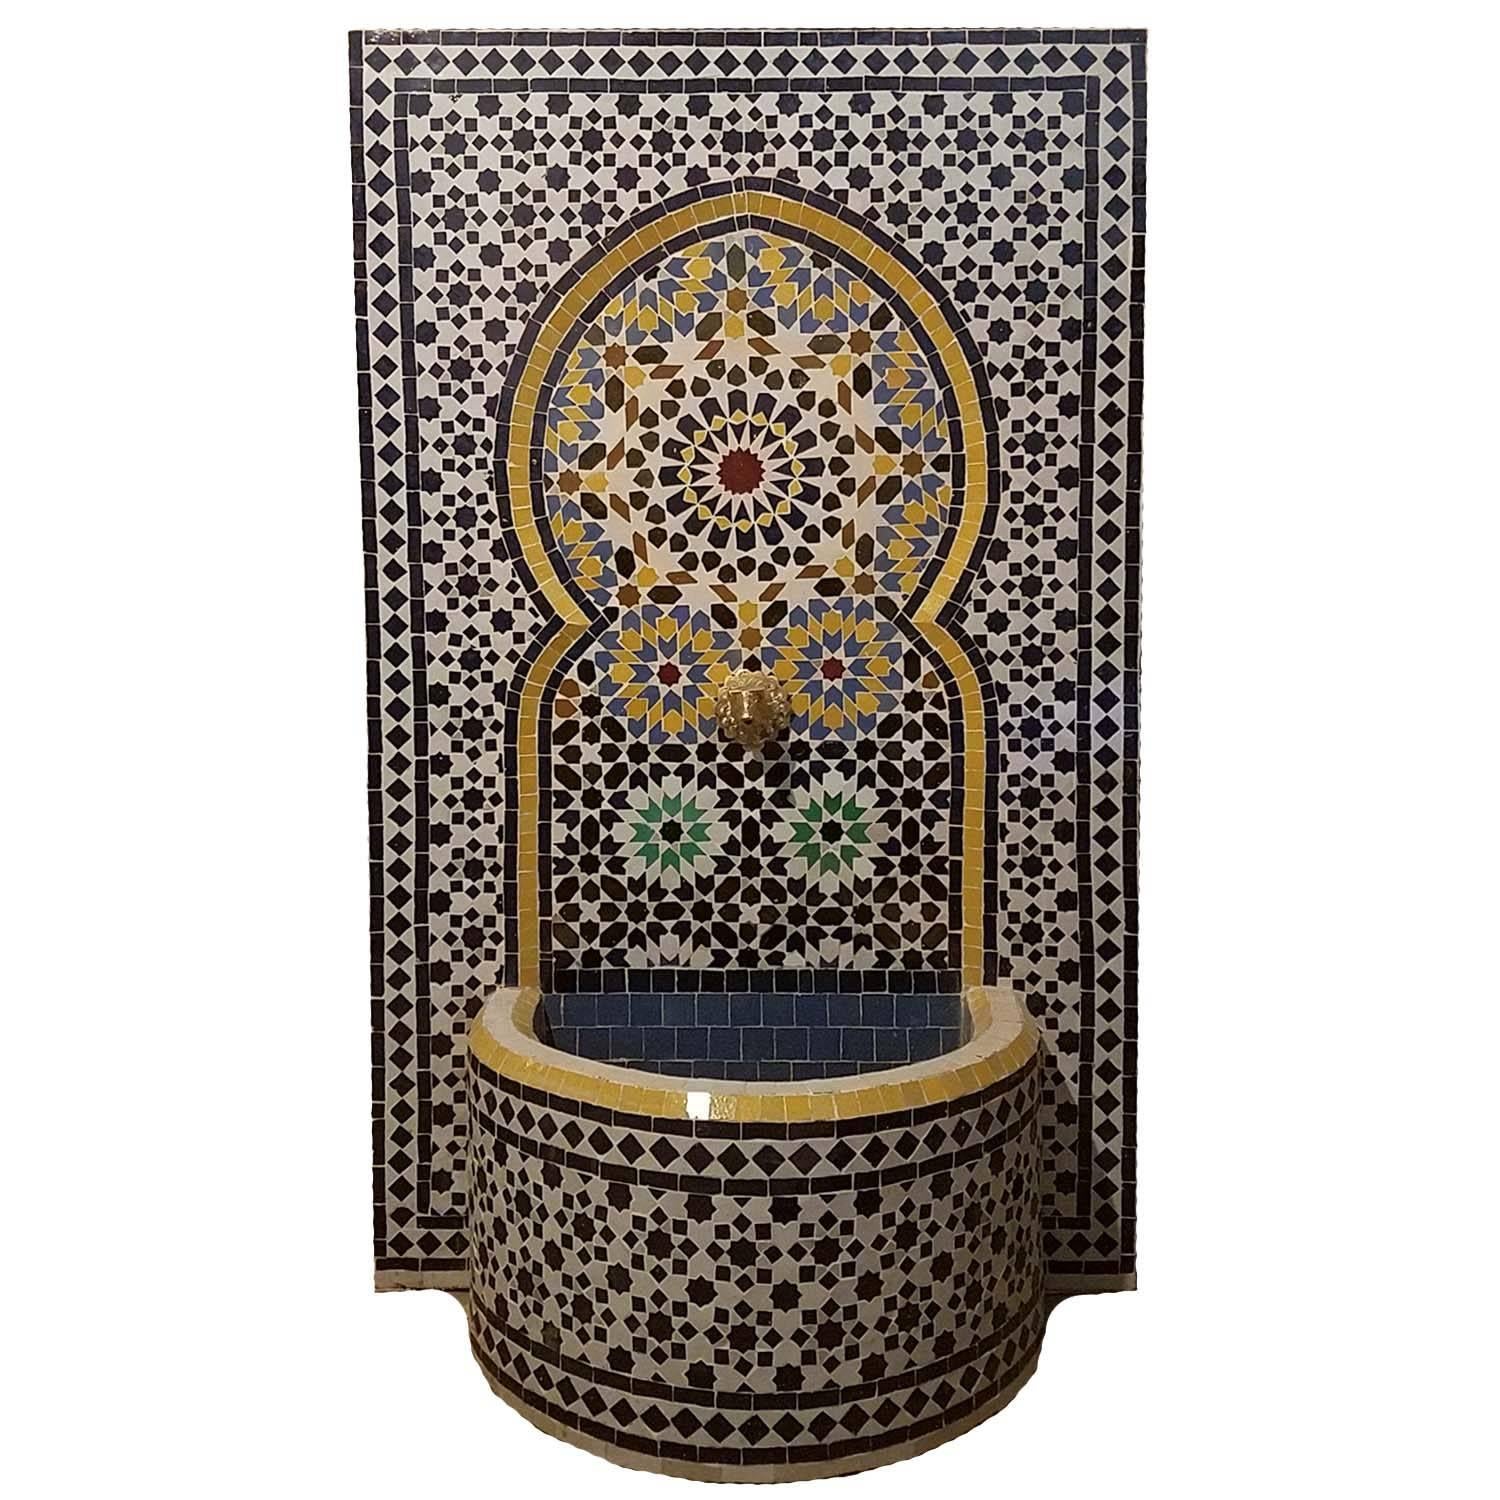 Cement Meknes Moroccan Mosaic Fountain, All Mosaics For Sale